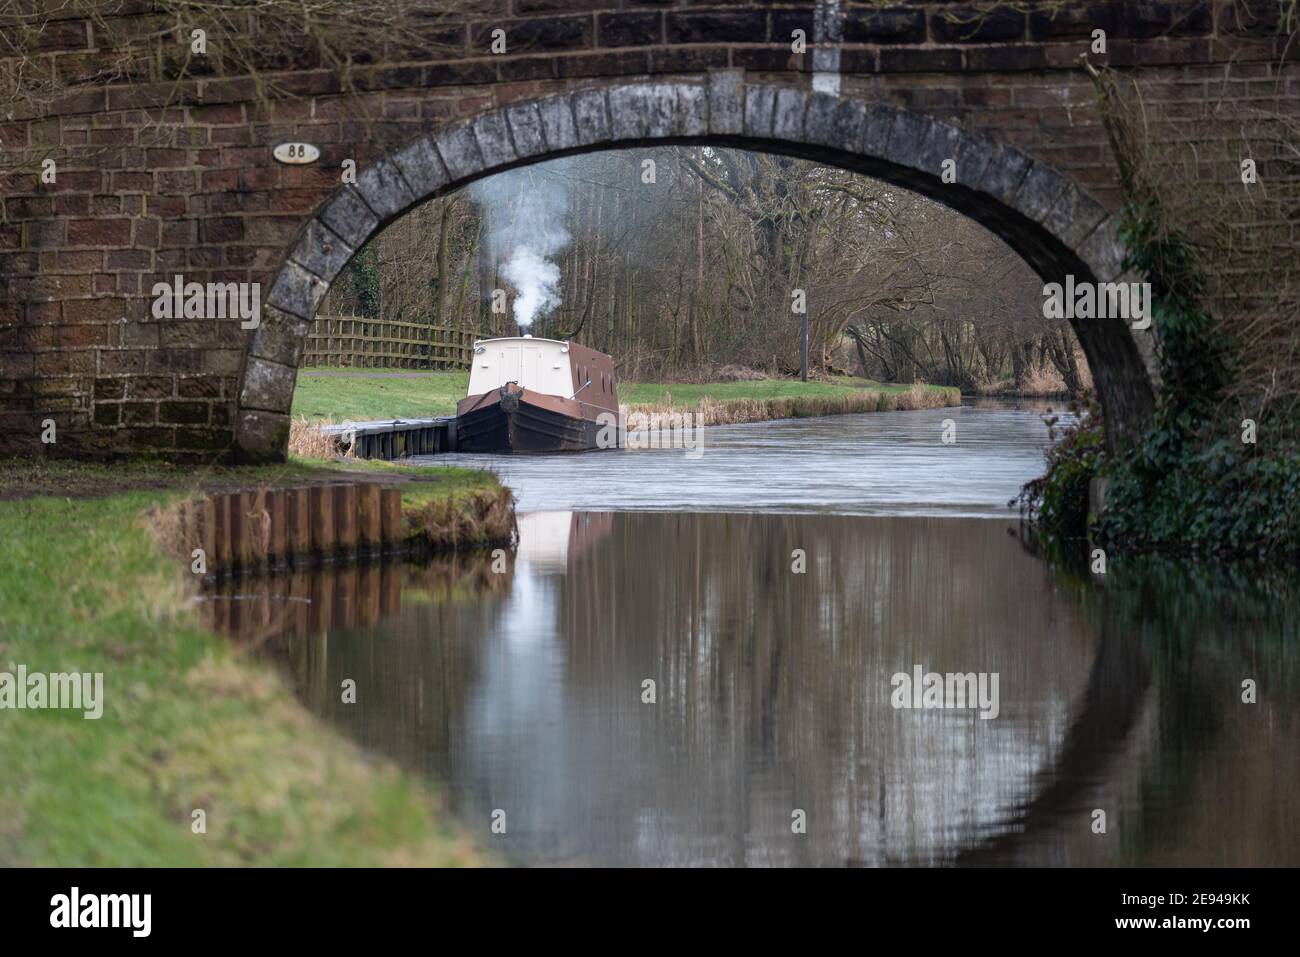 A single narrowboat moored on the Leeds Liverpool canal at Withnell Fold in Lancashire Stock Photo